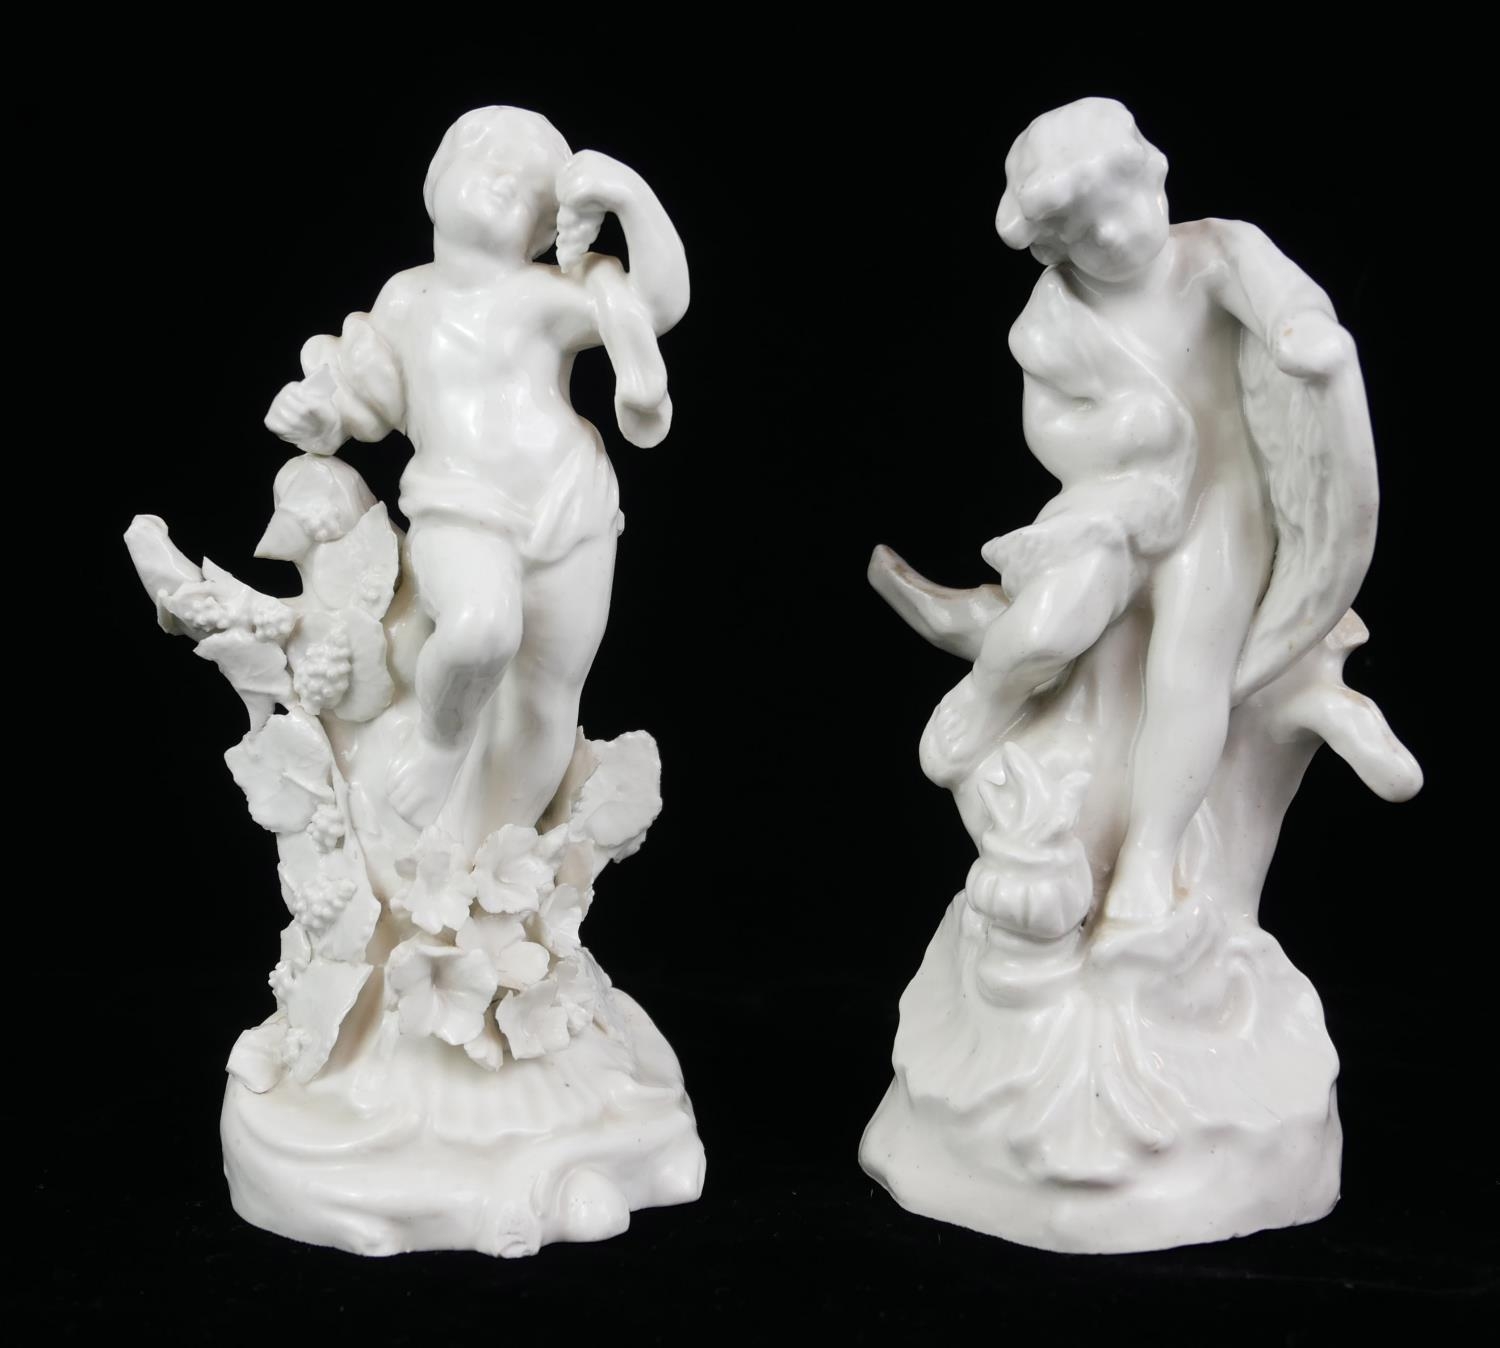 A PAIR OF RARE PLYMOTH 18TH CENTURY HARD PASTE BLANC DE CHINE PORCELAIN MODELS OF ALLEGORICAL